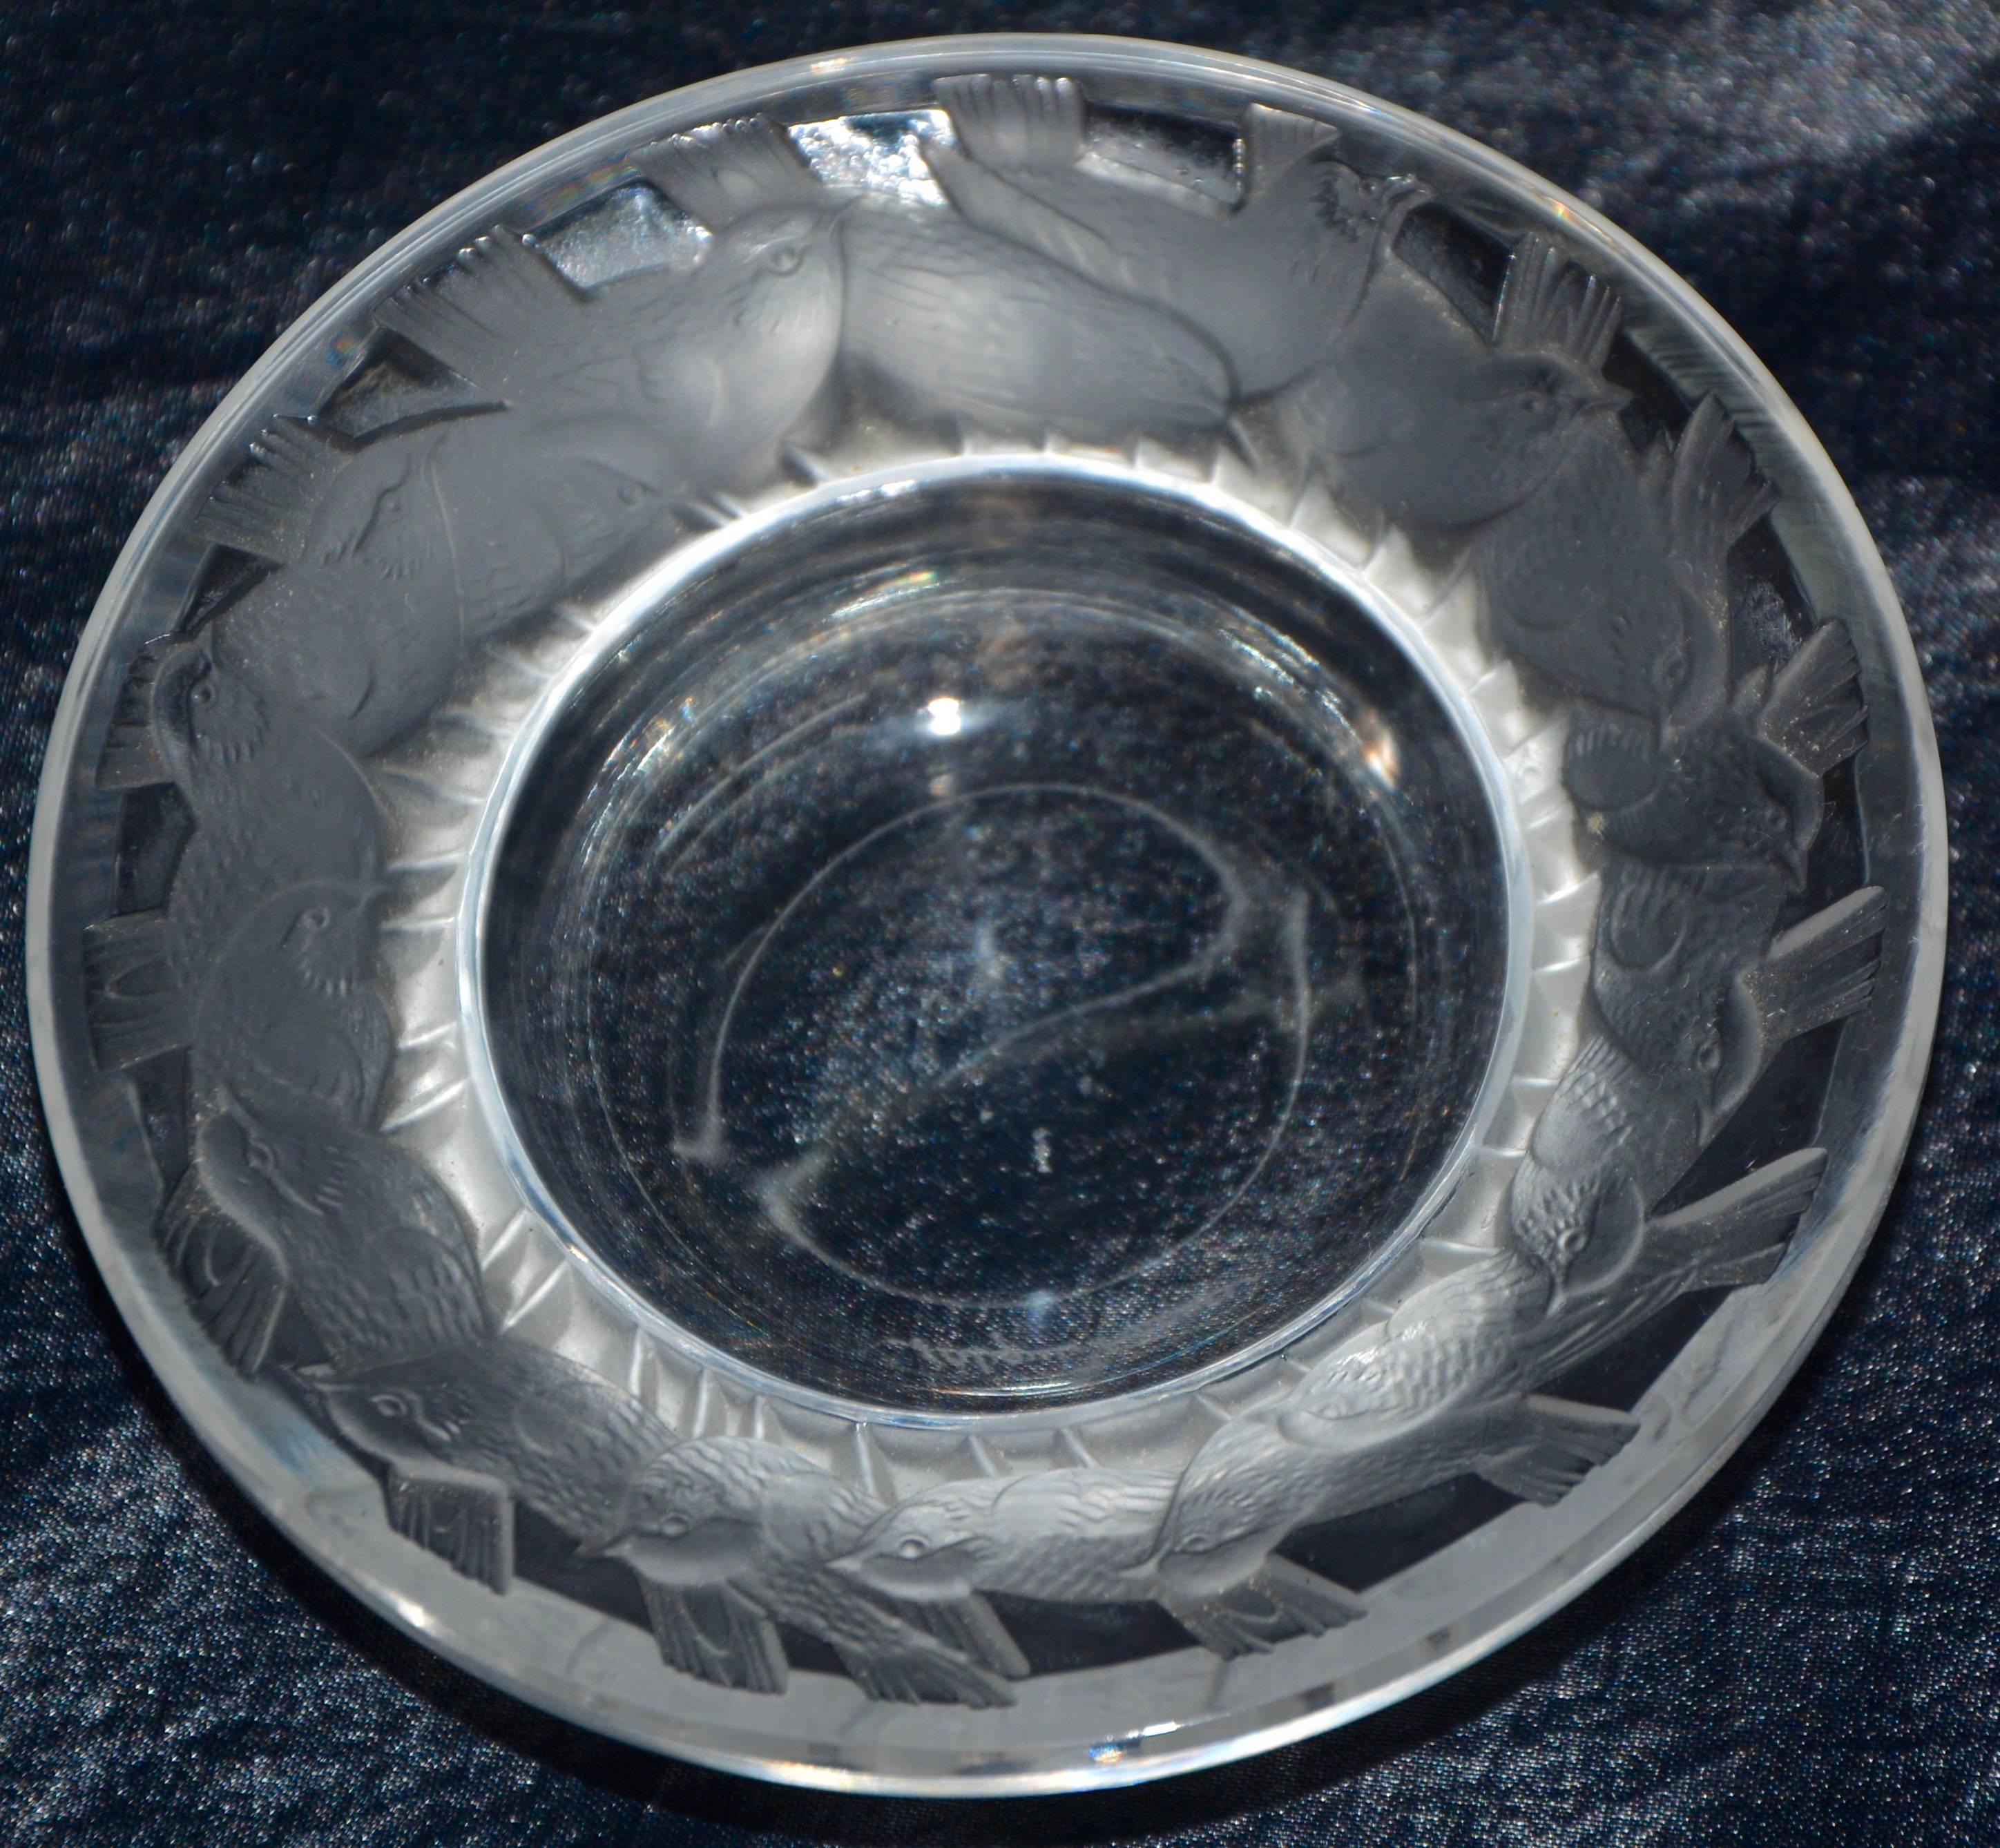 A ring of tiny sparrows are running around the rim of this Lalique of France pin dish. The dish is named Irene. The sparrows are finished in the satin finish Lalique is well known for. The piece is signed in cursive on the bottom.